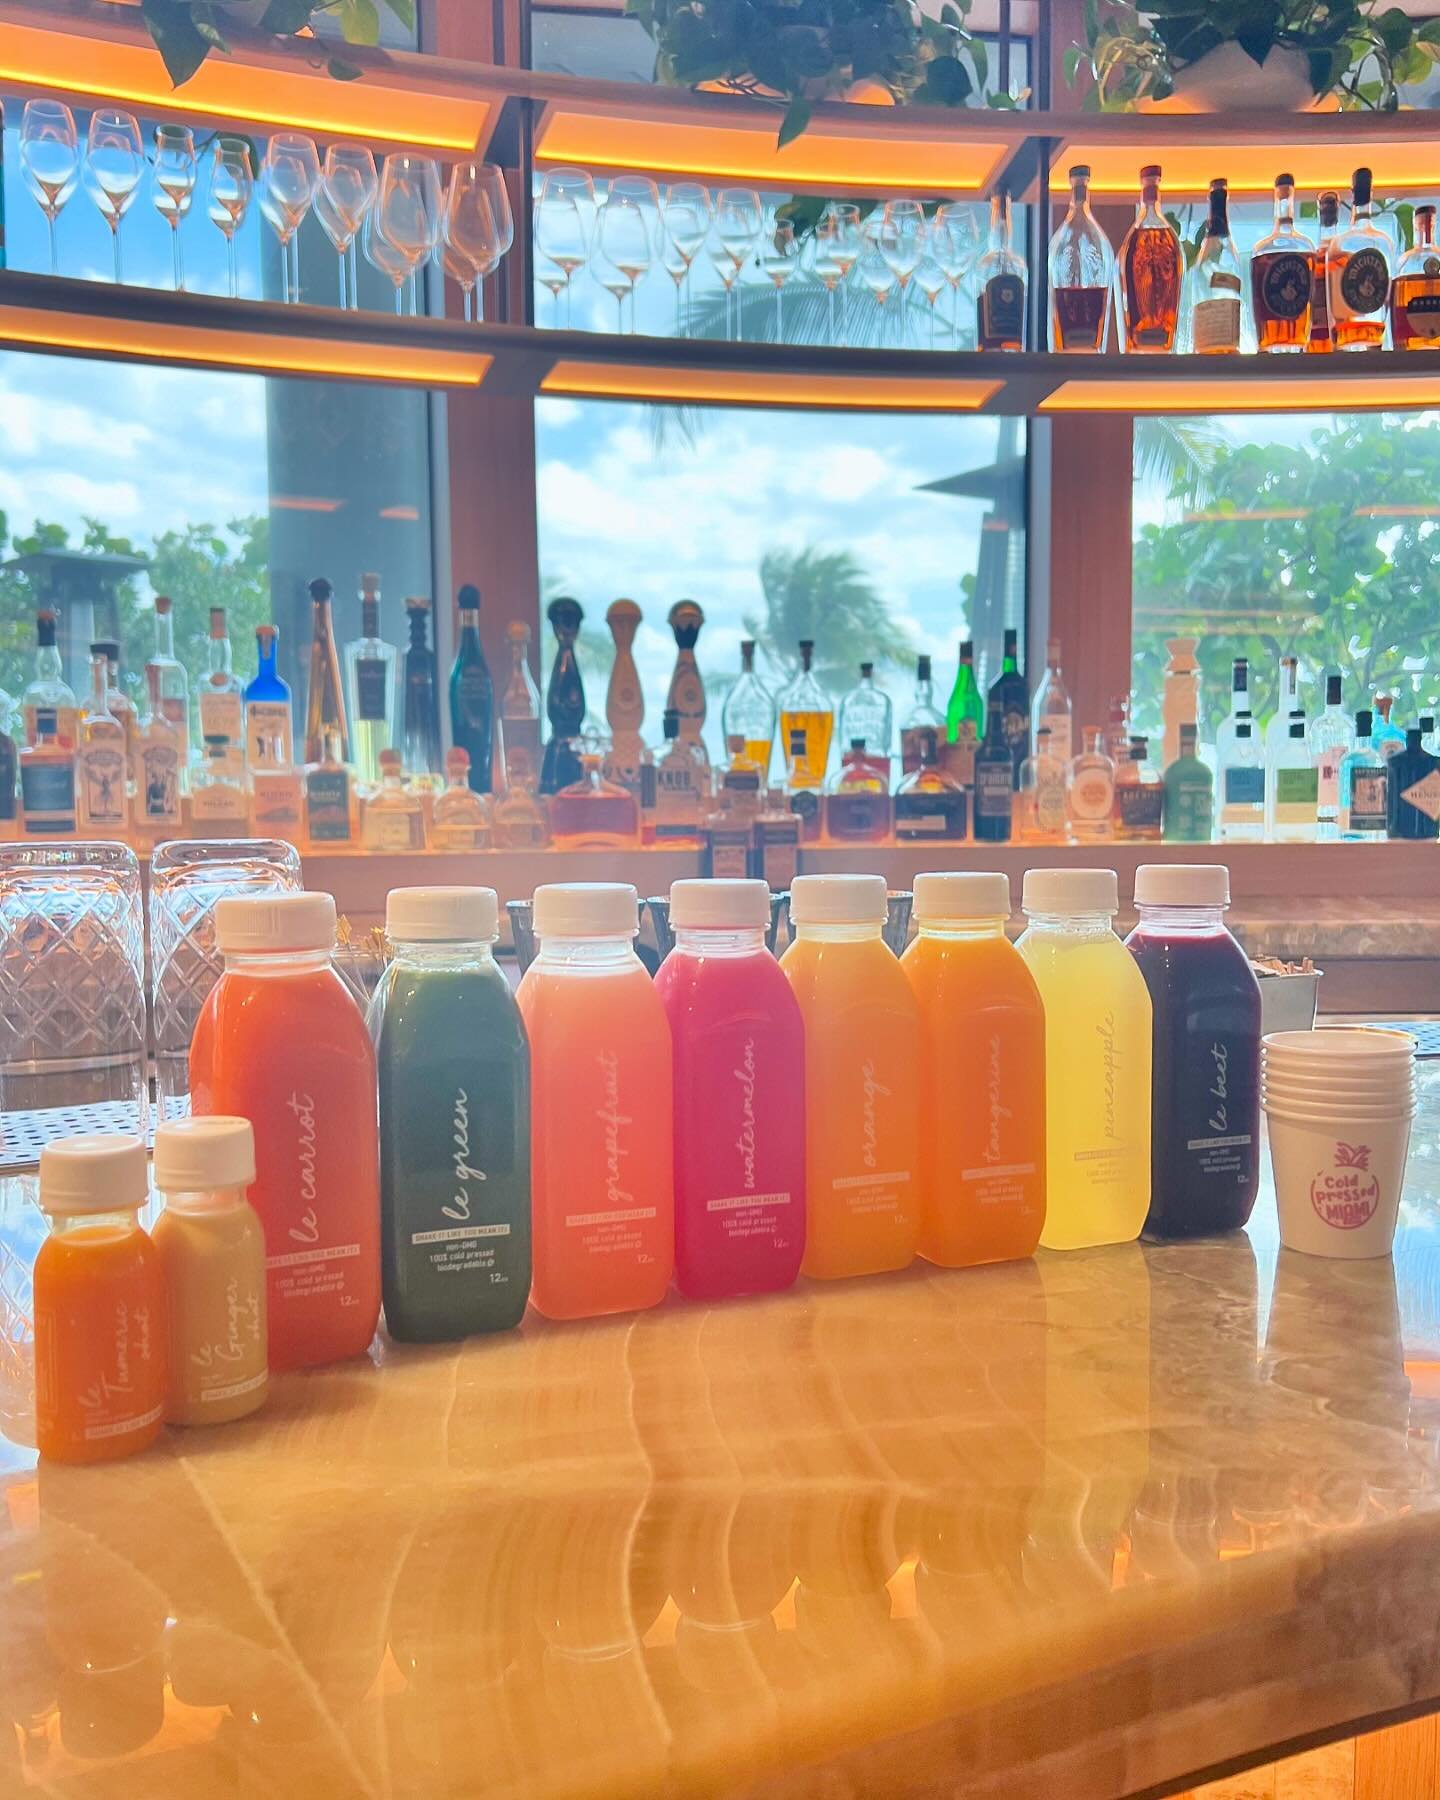 Another perfect golden hour in south Florida.

#coldpressed #natural #freshjuice #local  #sustainable #noadditives #noheat #freshfruit #juice #juicy #fresh #hospitality #cocktail #beverage #nonalcoholic #healthychoice #goodforyou #betterchoice  #orga